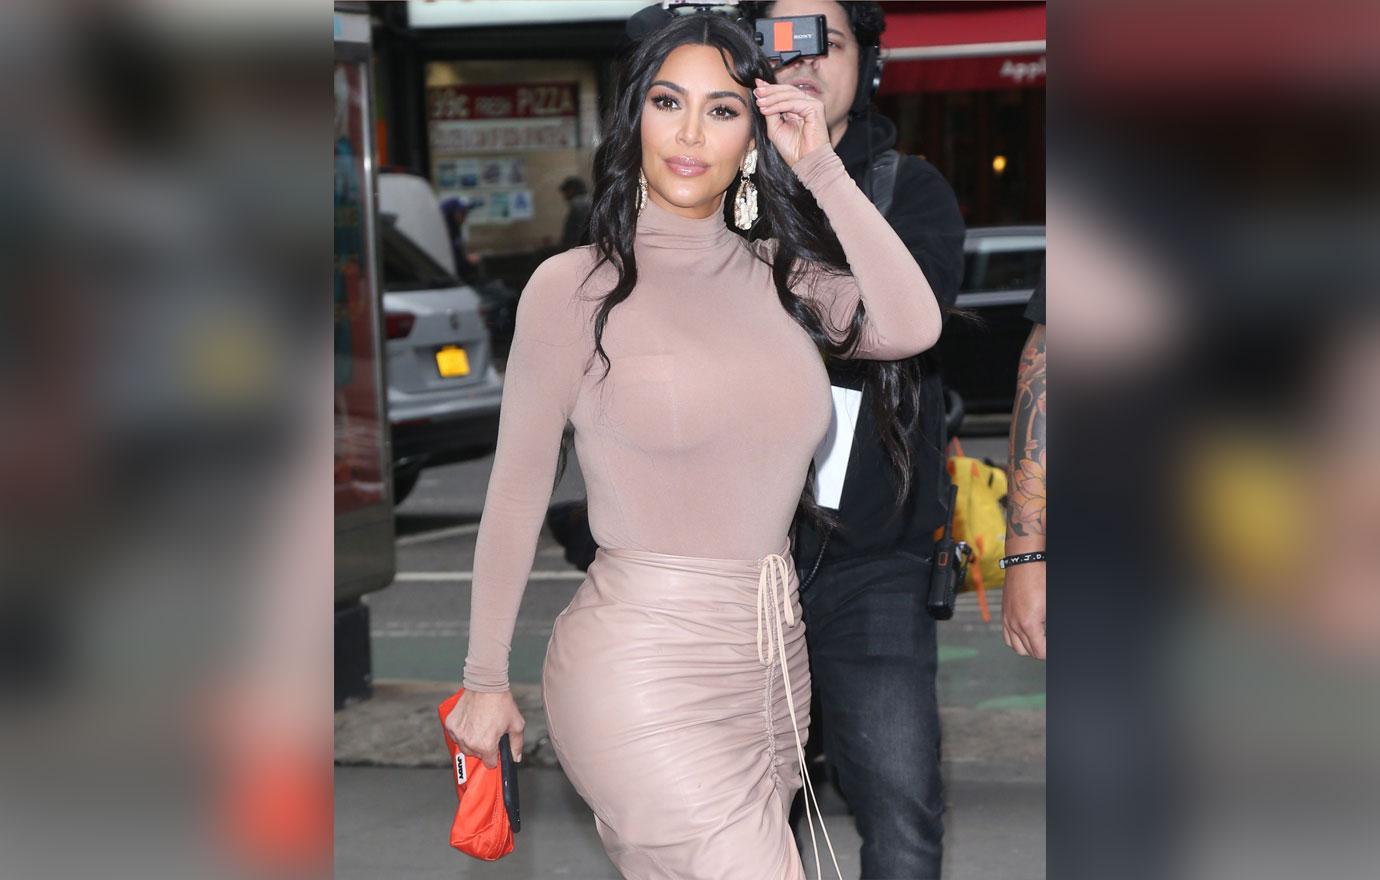 Kim Kardashian West's Skims Line to Be Available at Nordstrom